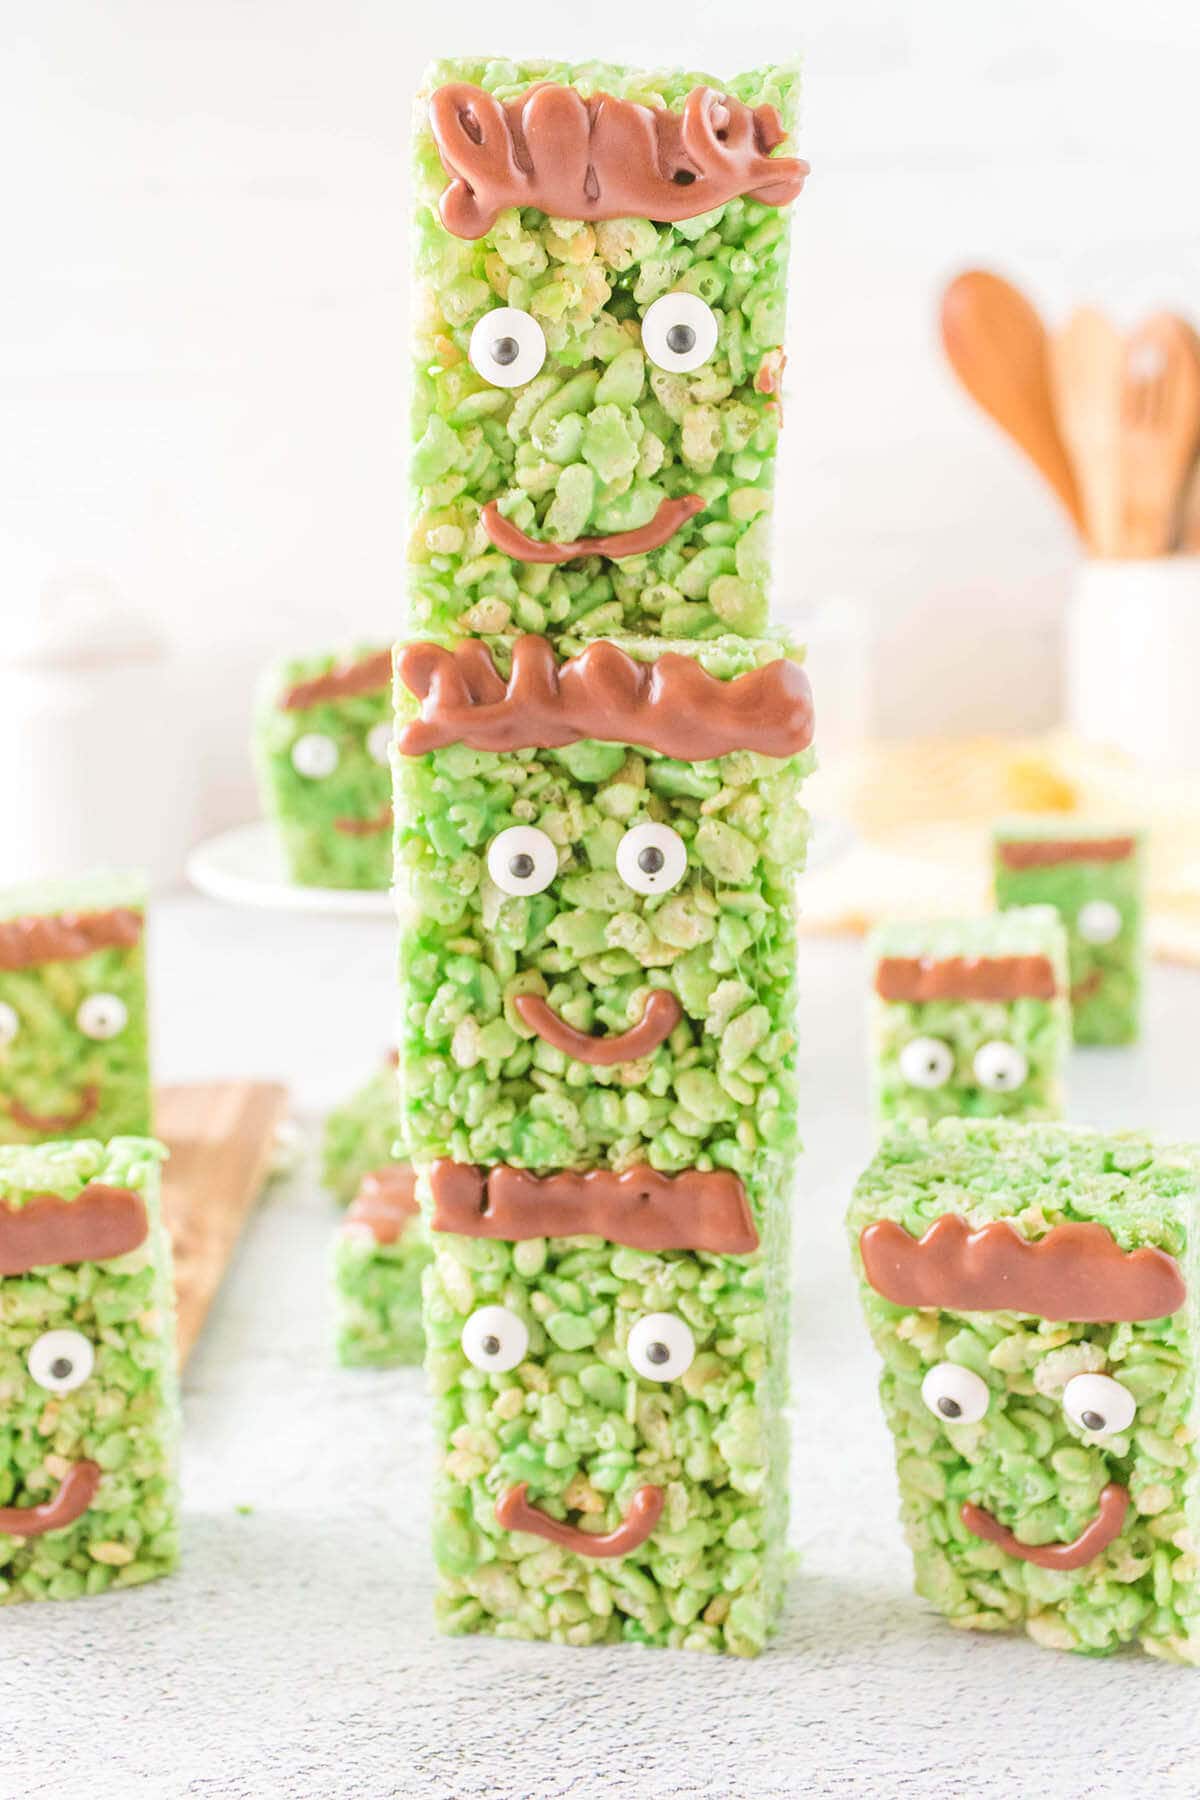 Stacks of Frankenstein Rice Crispy Treats decorated with little faces.